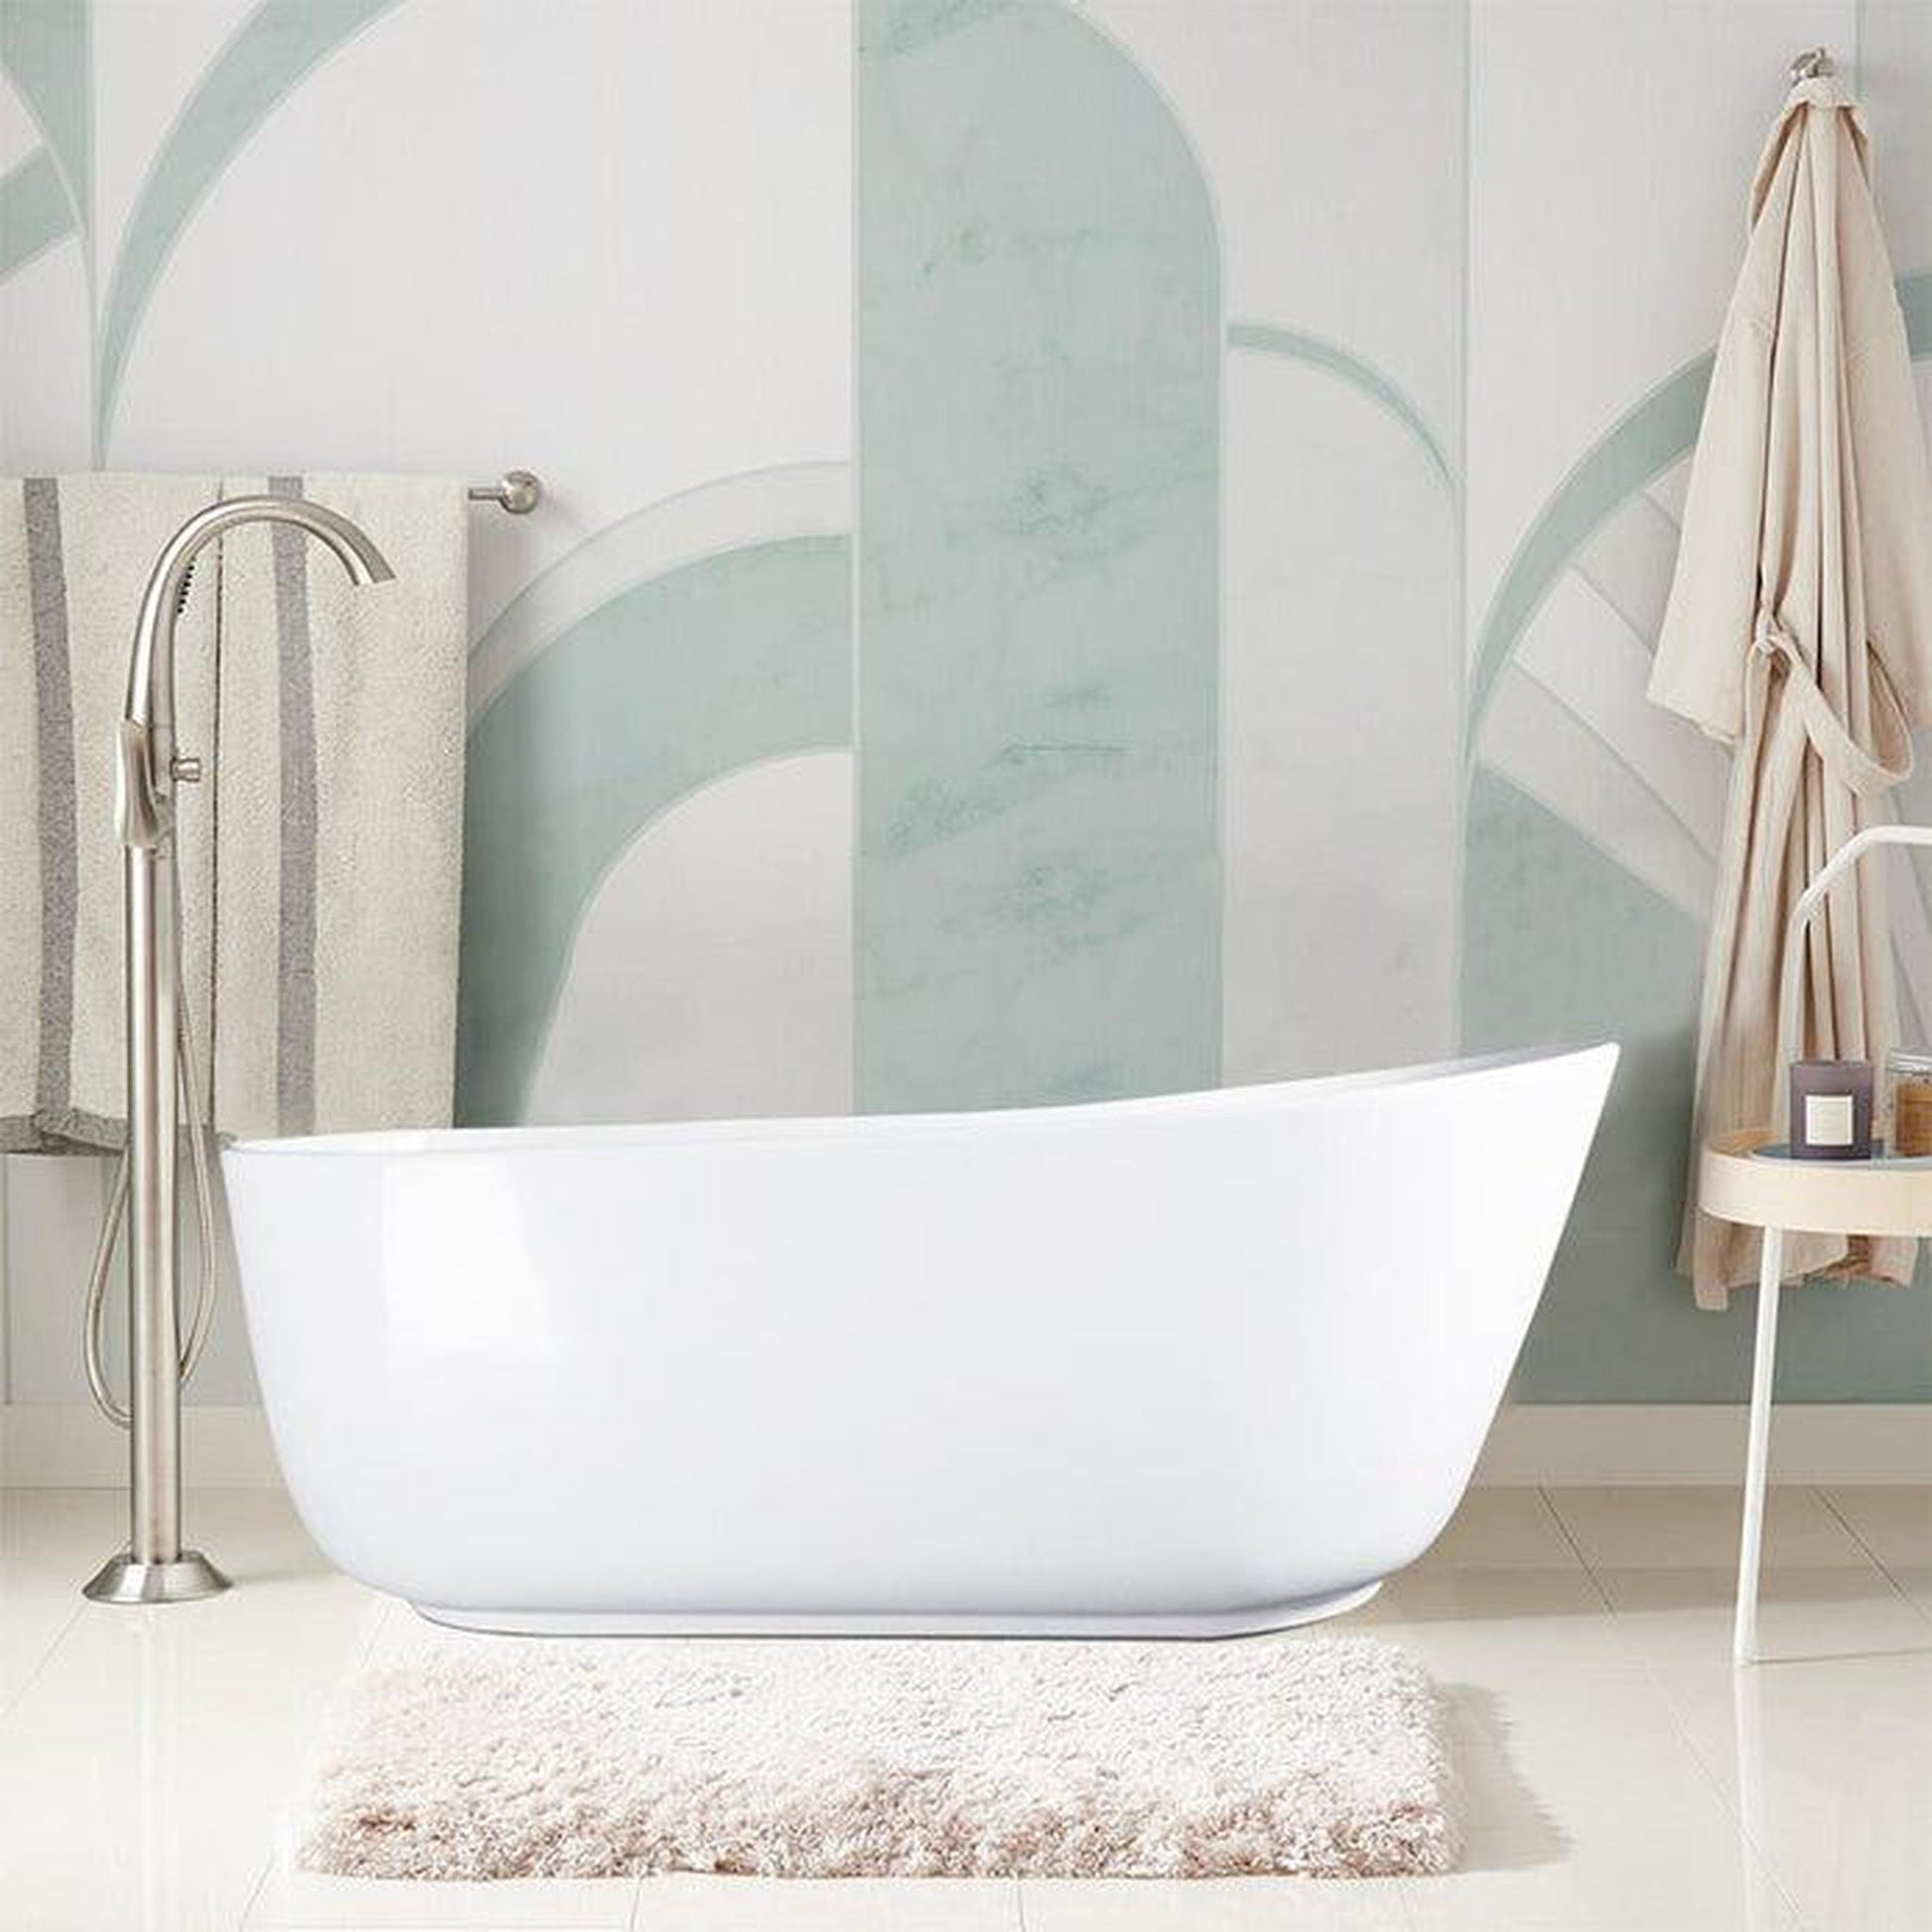 Vanity Art 67" Glossy White Solid Surface Resin Stone Freestanding Flatbottom Bathtub With Overflow and Pop-up Drain